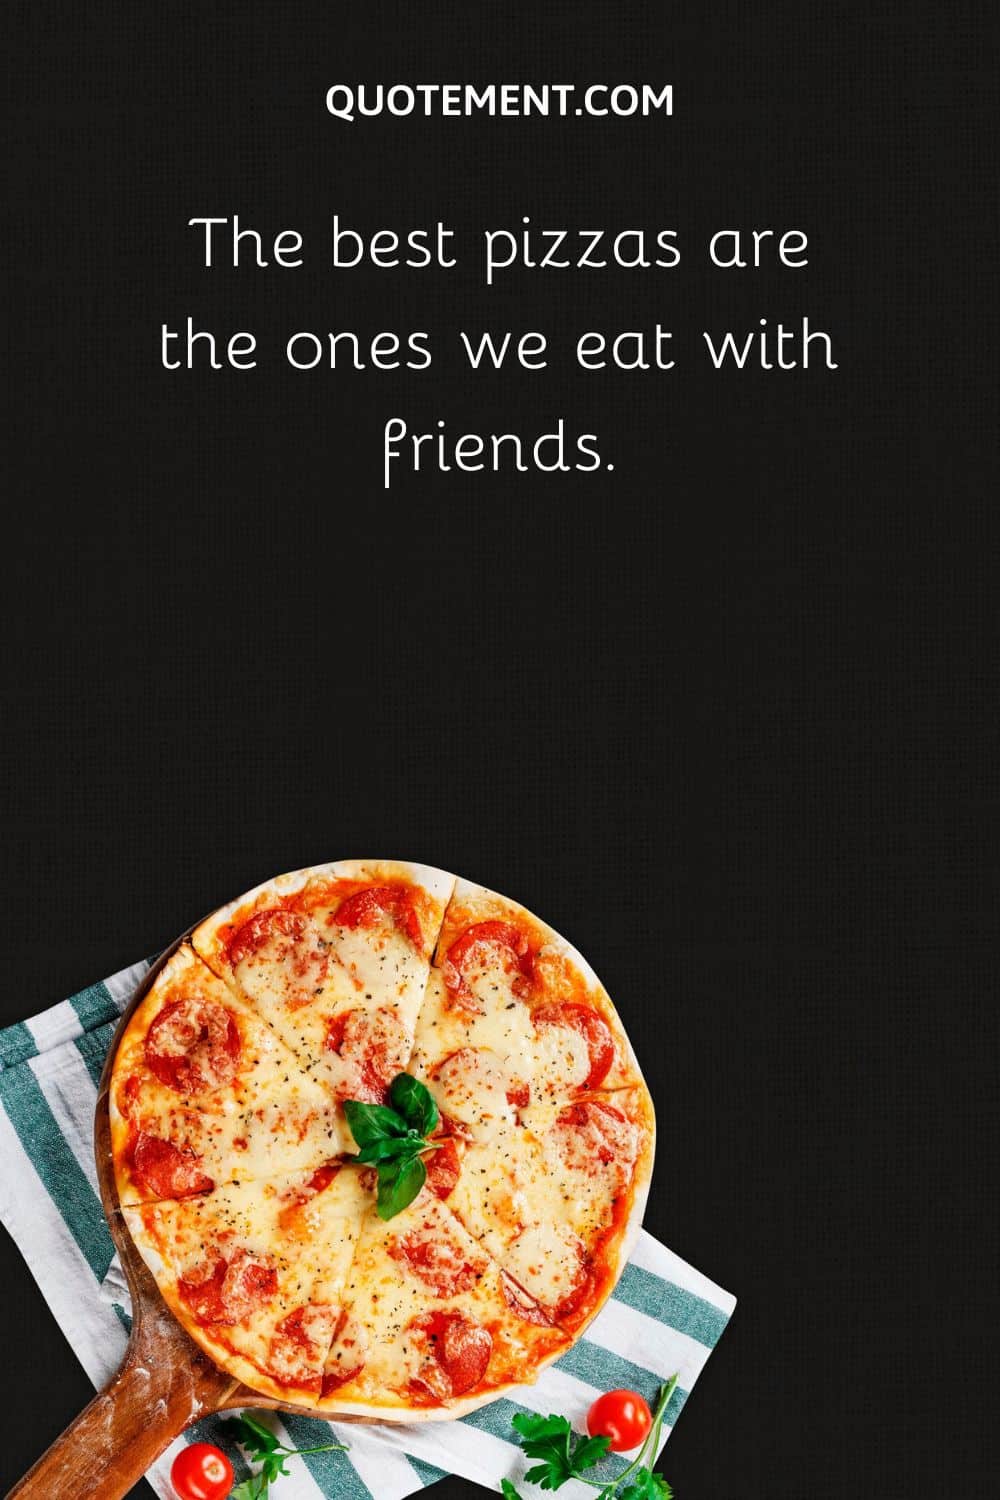 The best pizzas are the ones we eat with friends